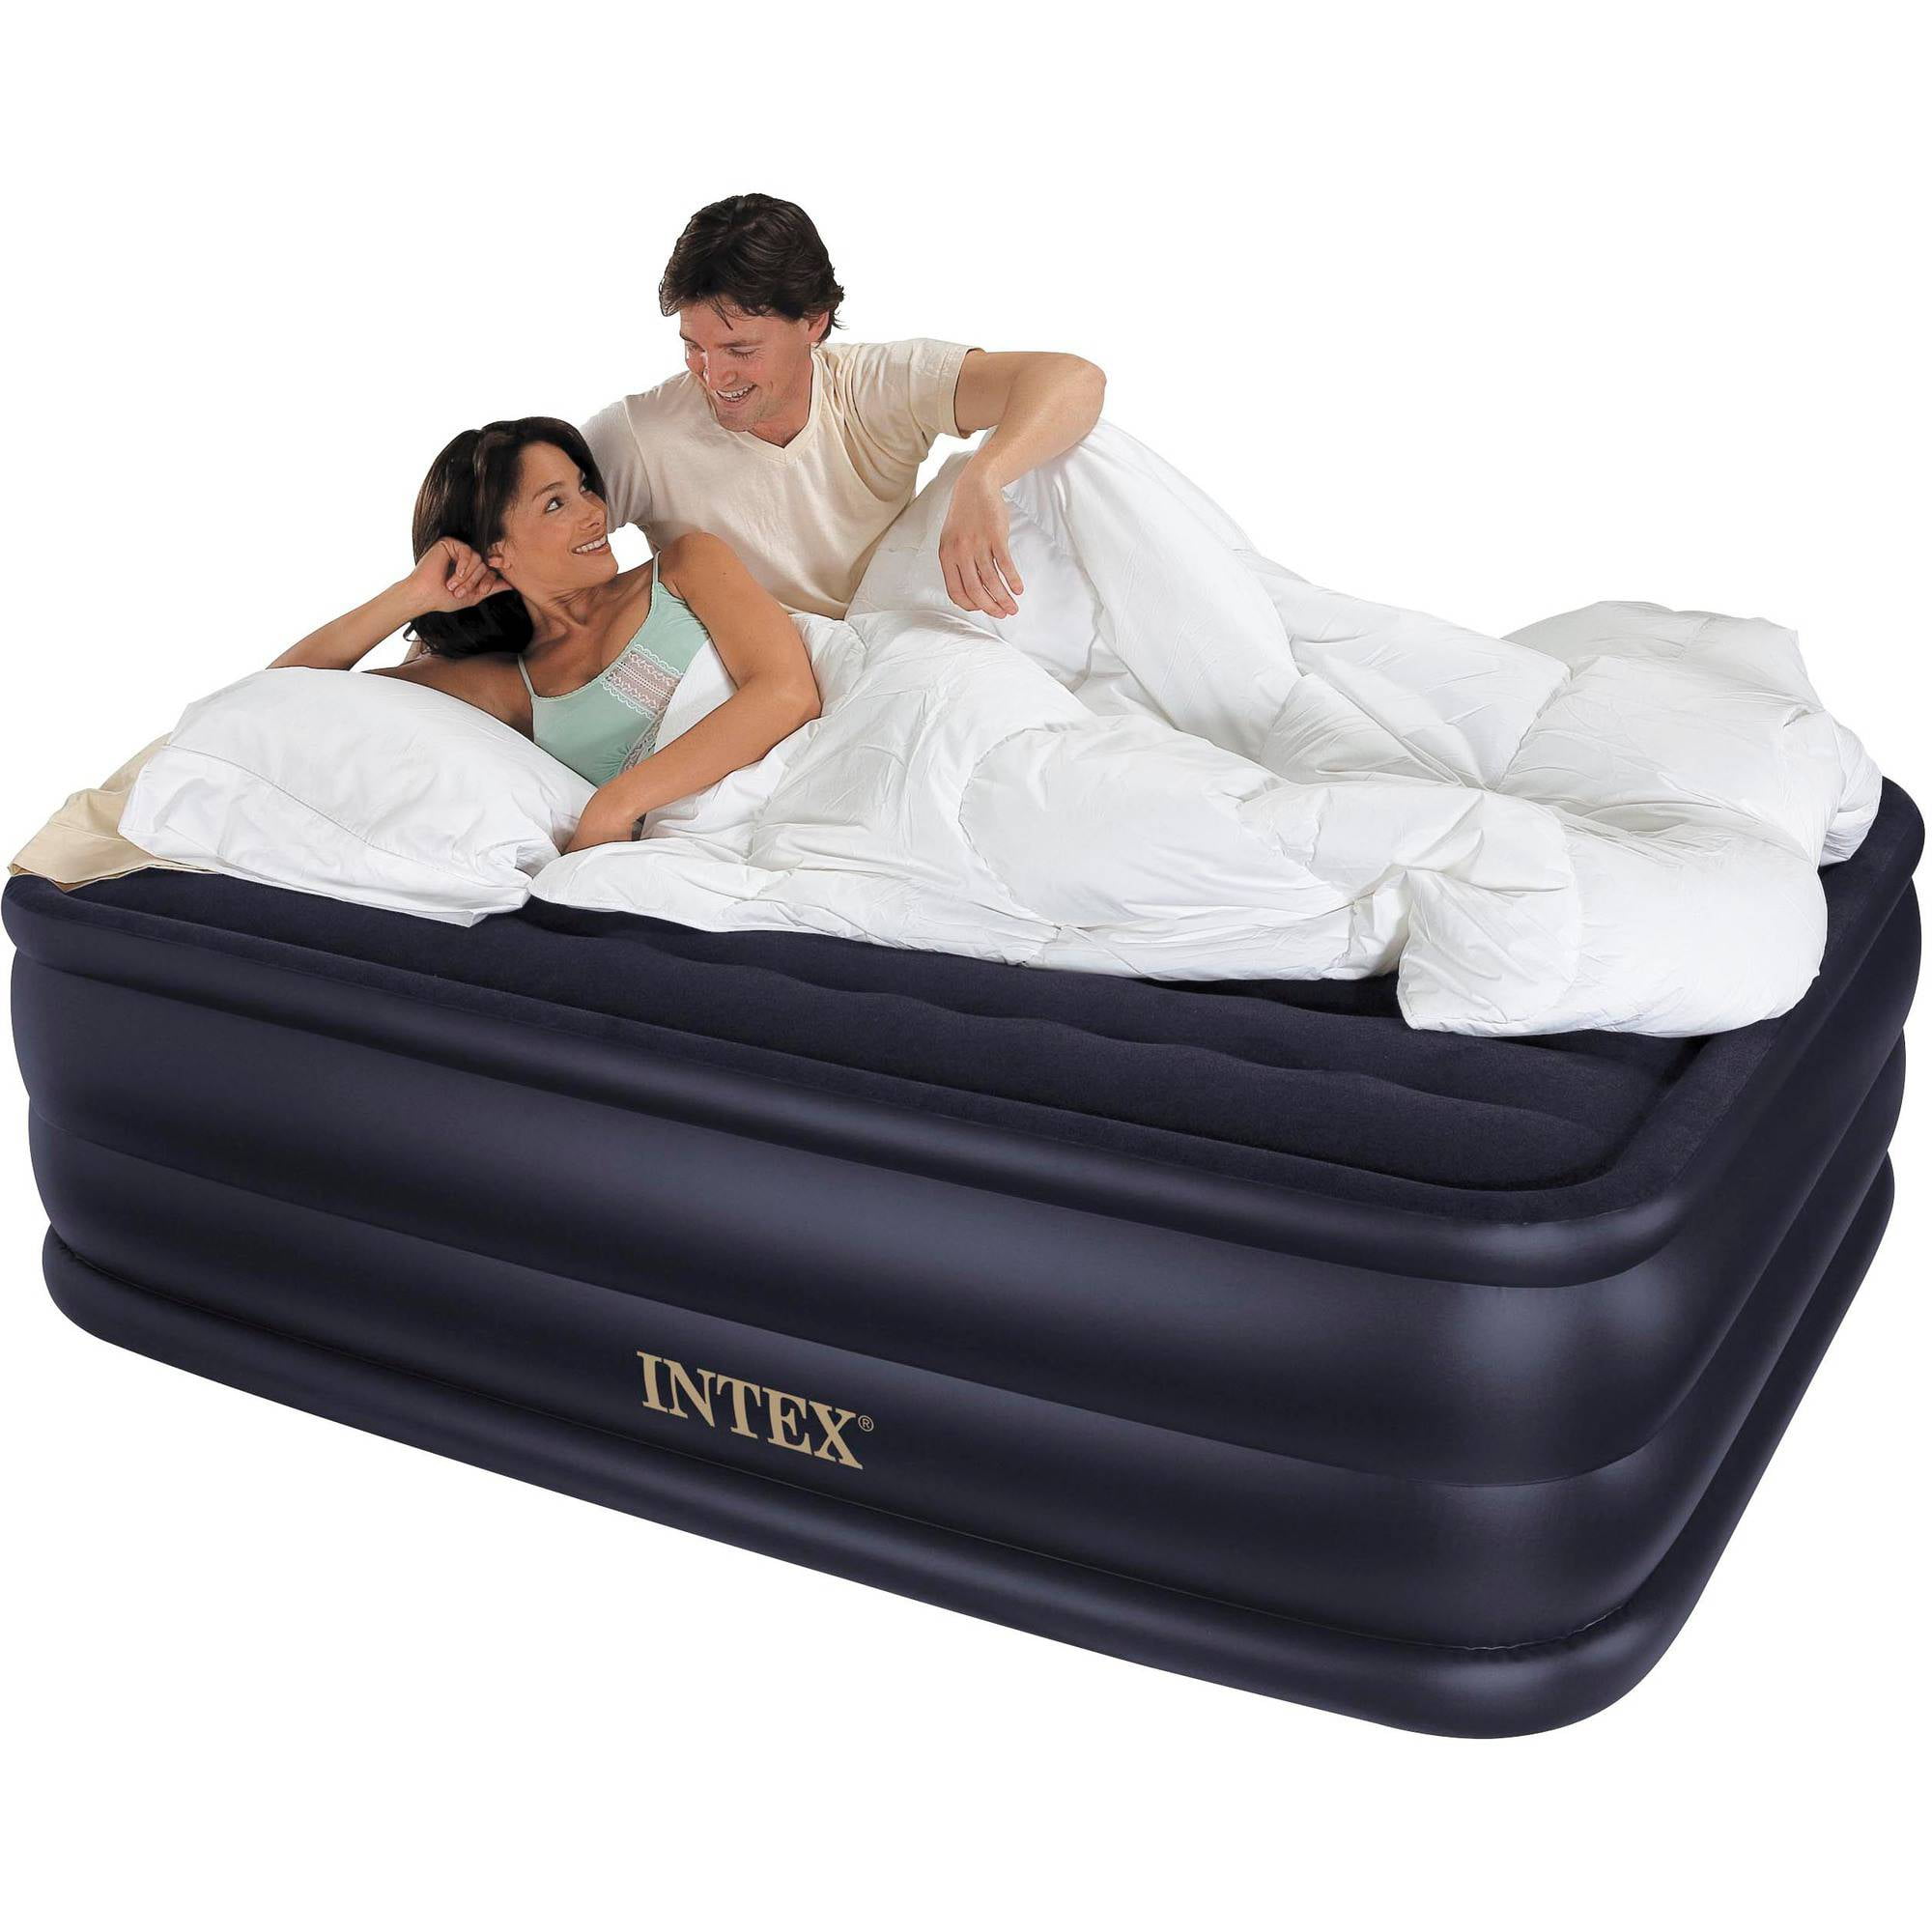 Intex Airbed Inflatable Mattress Queen Air Beds Blow Up Bed Waterproof 600 lb 